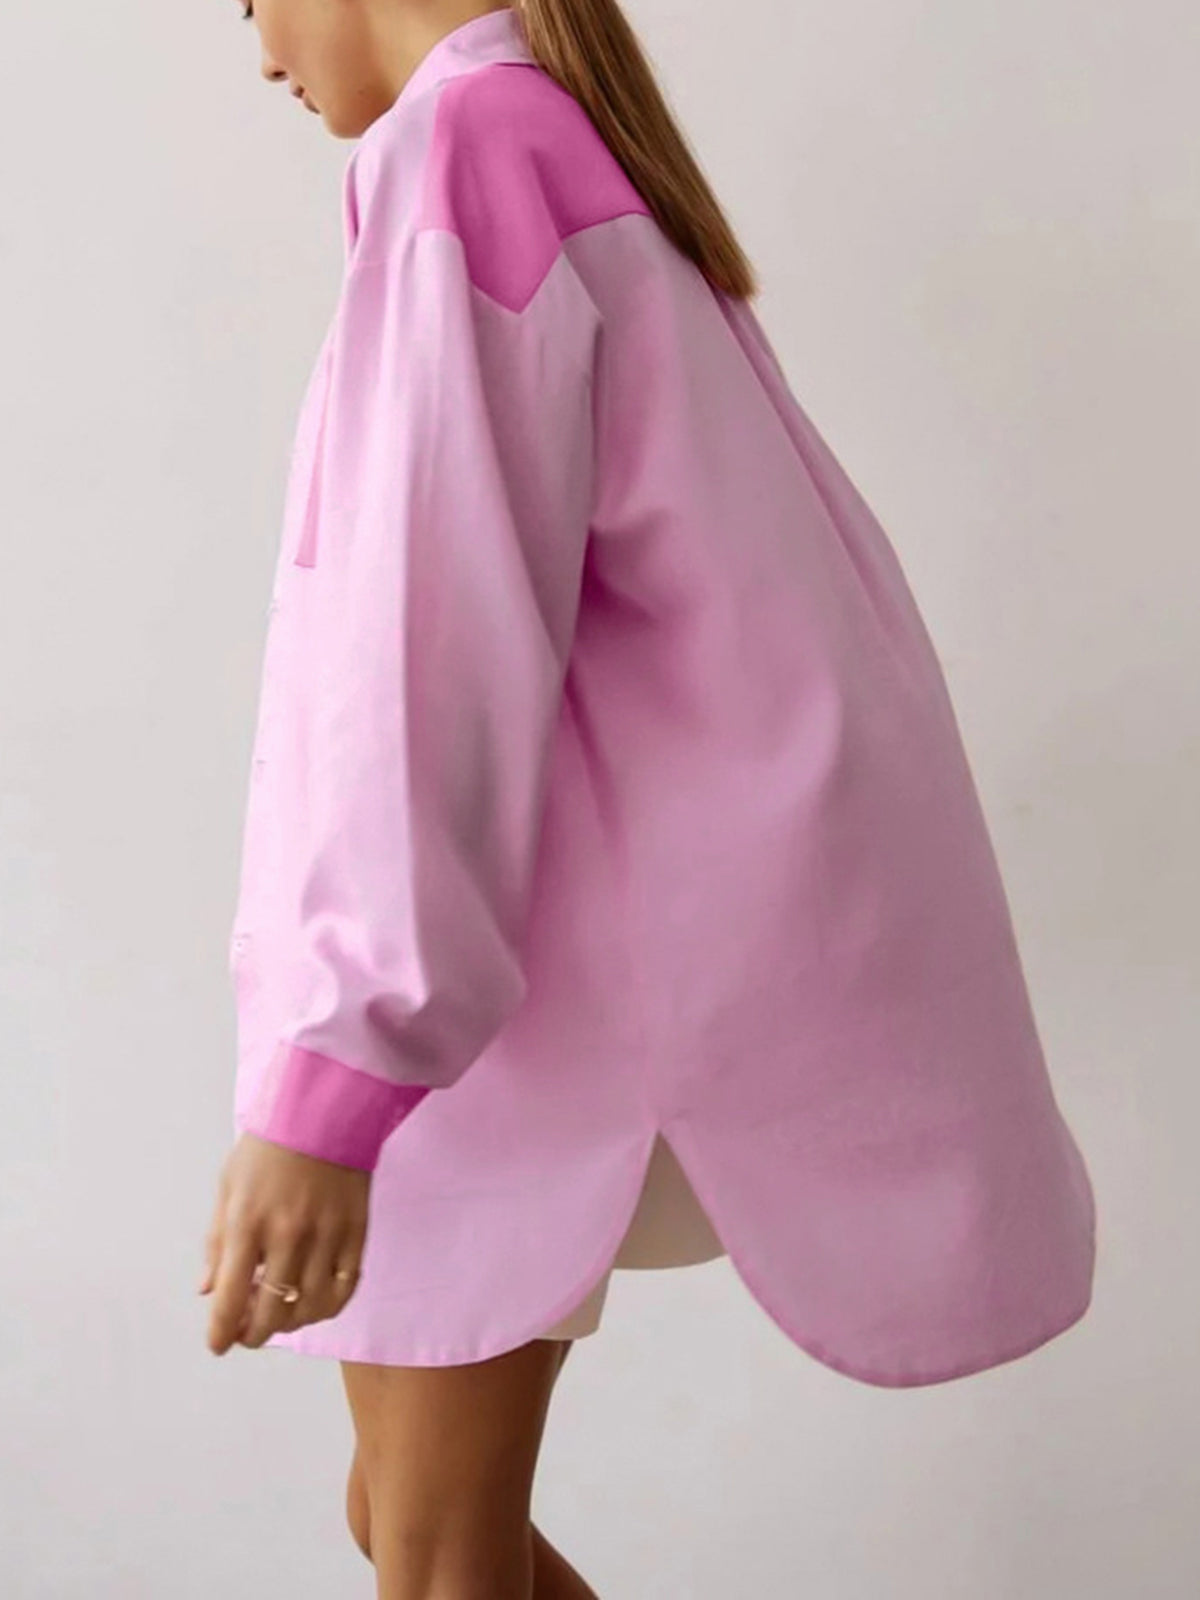 Rosy Chateau Patchwork Oversized Shirt